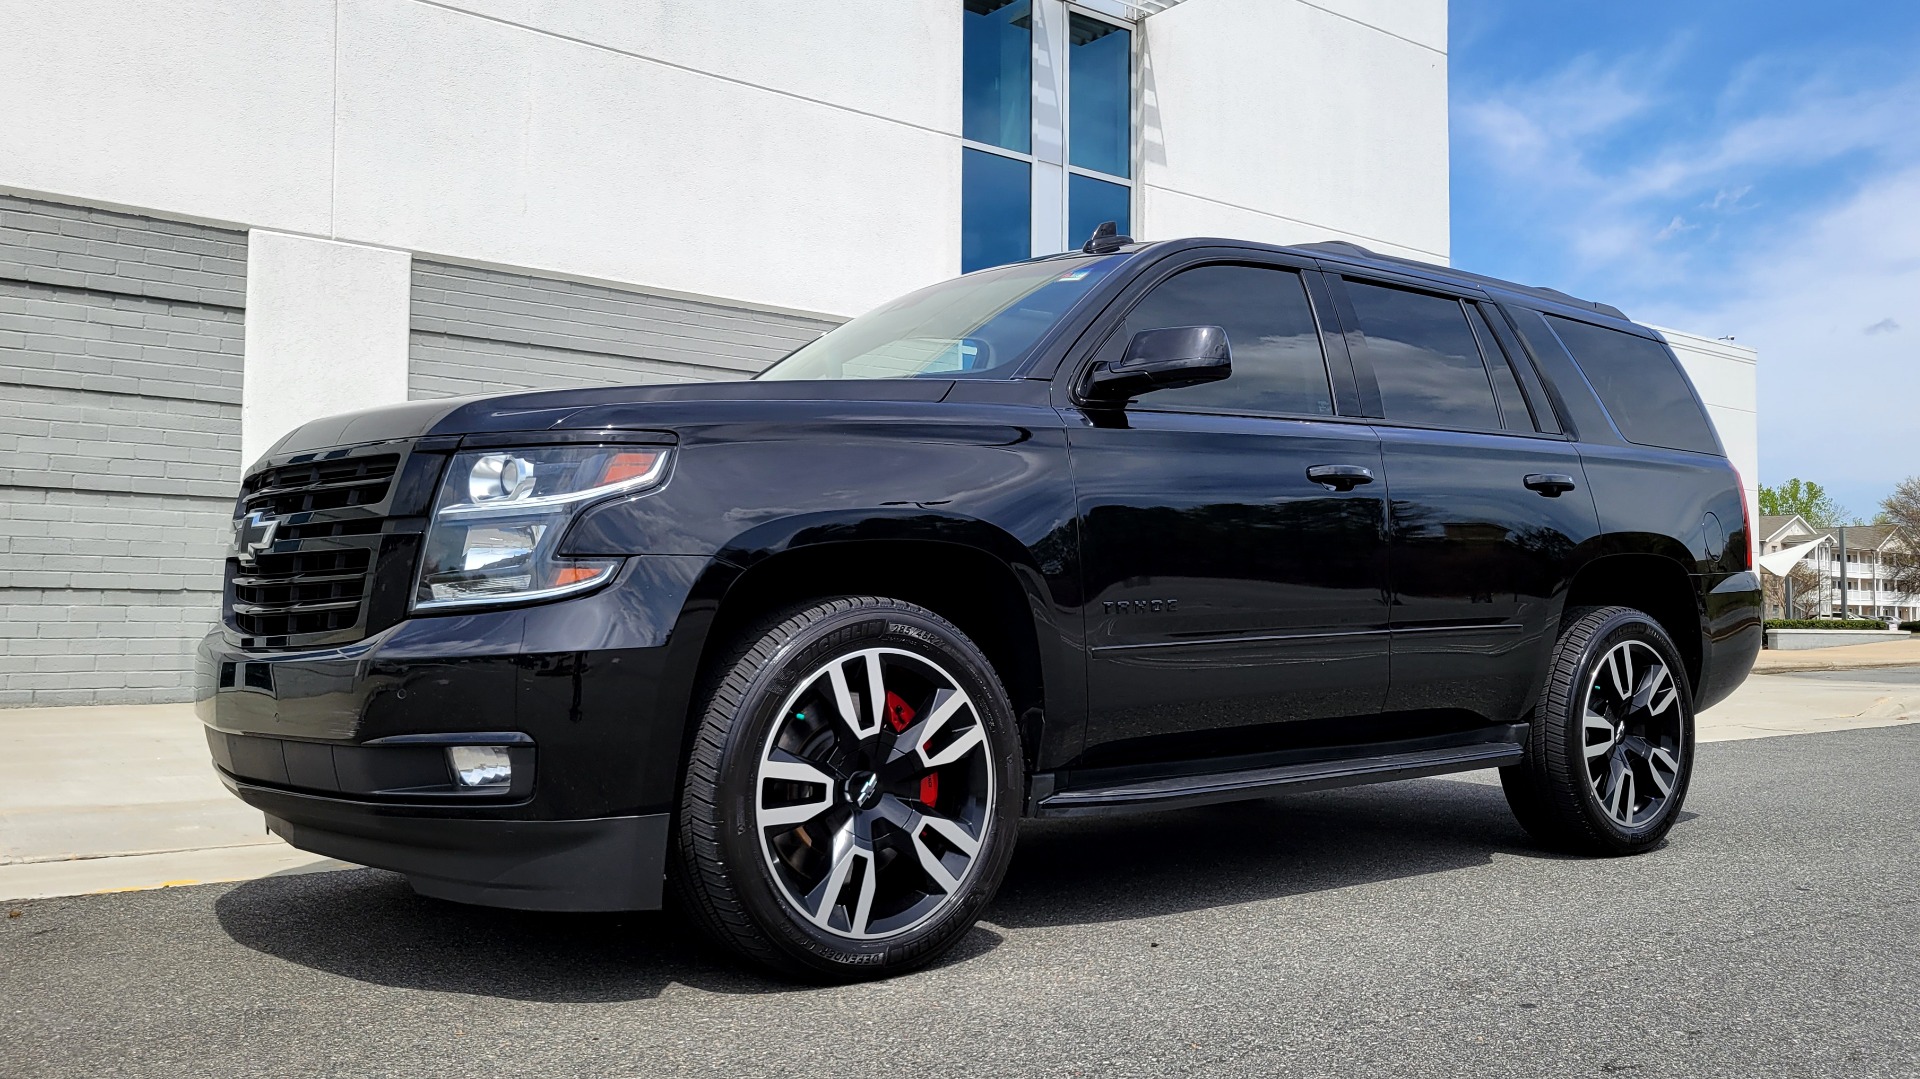 Used 2018 Chevrolet TAHOE PREMIER 6.2L 4X4 / RST EDITION / NAV / DVD / HUD / SUNROOF / REARVIEW for sale Sold at Formula Imports in Charlotte NC 28227 4